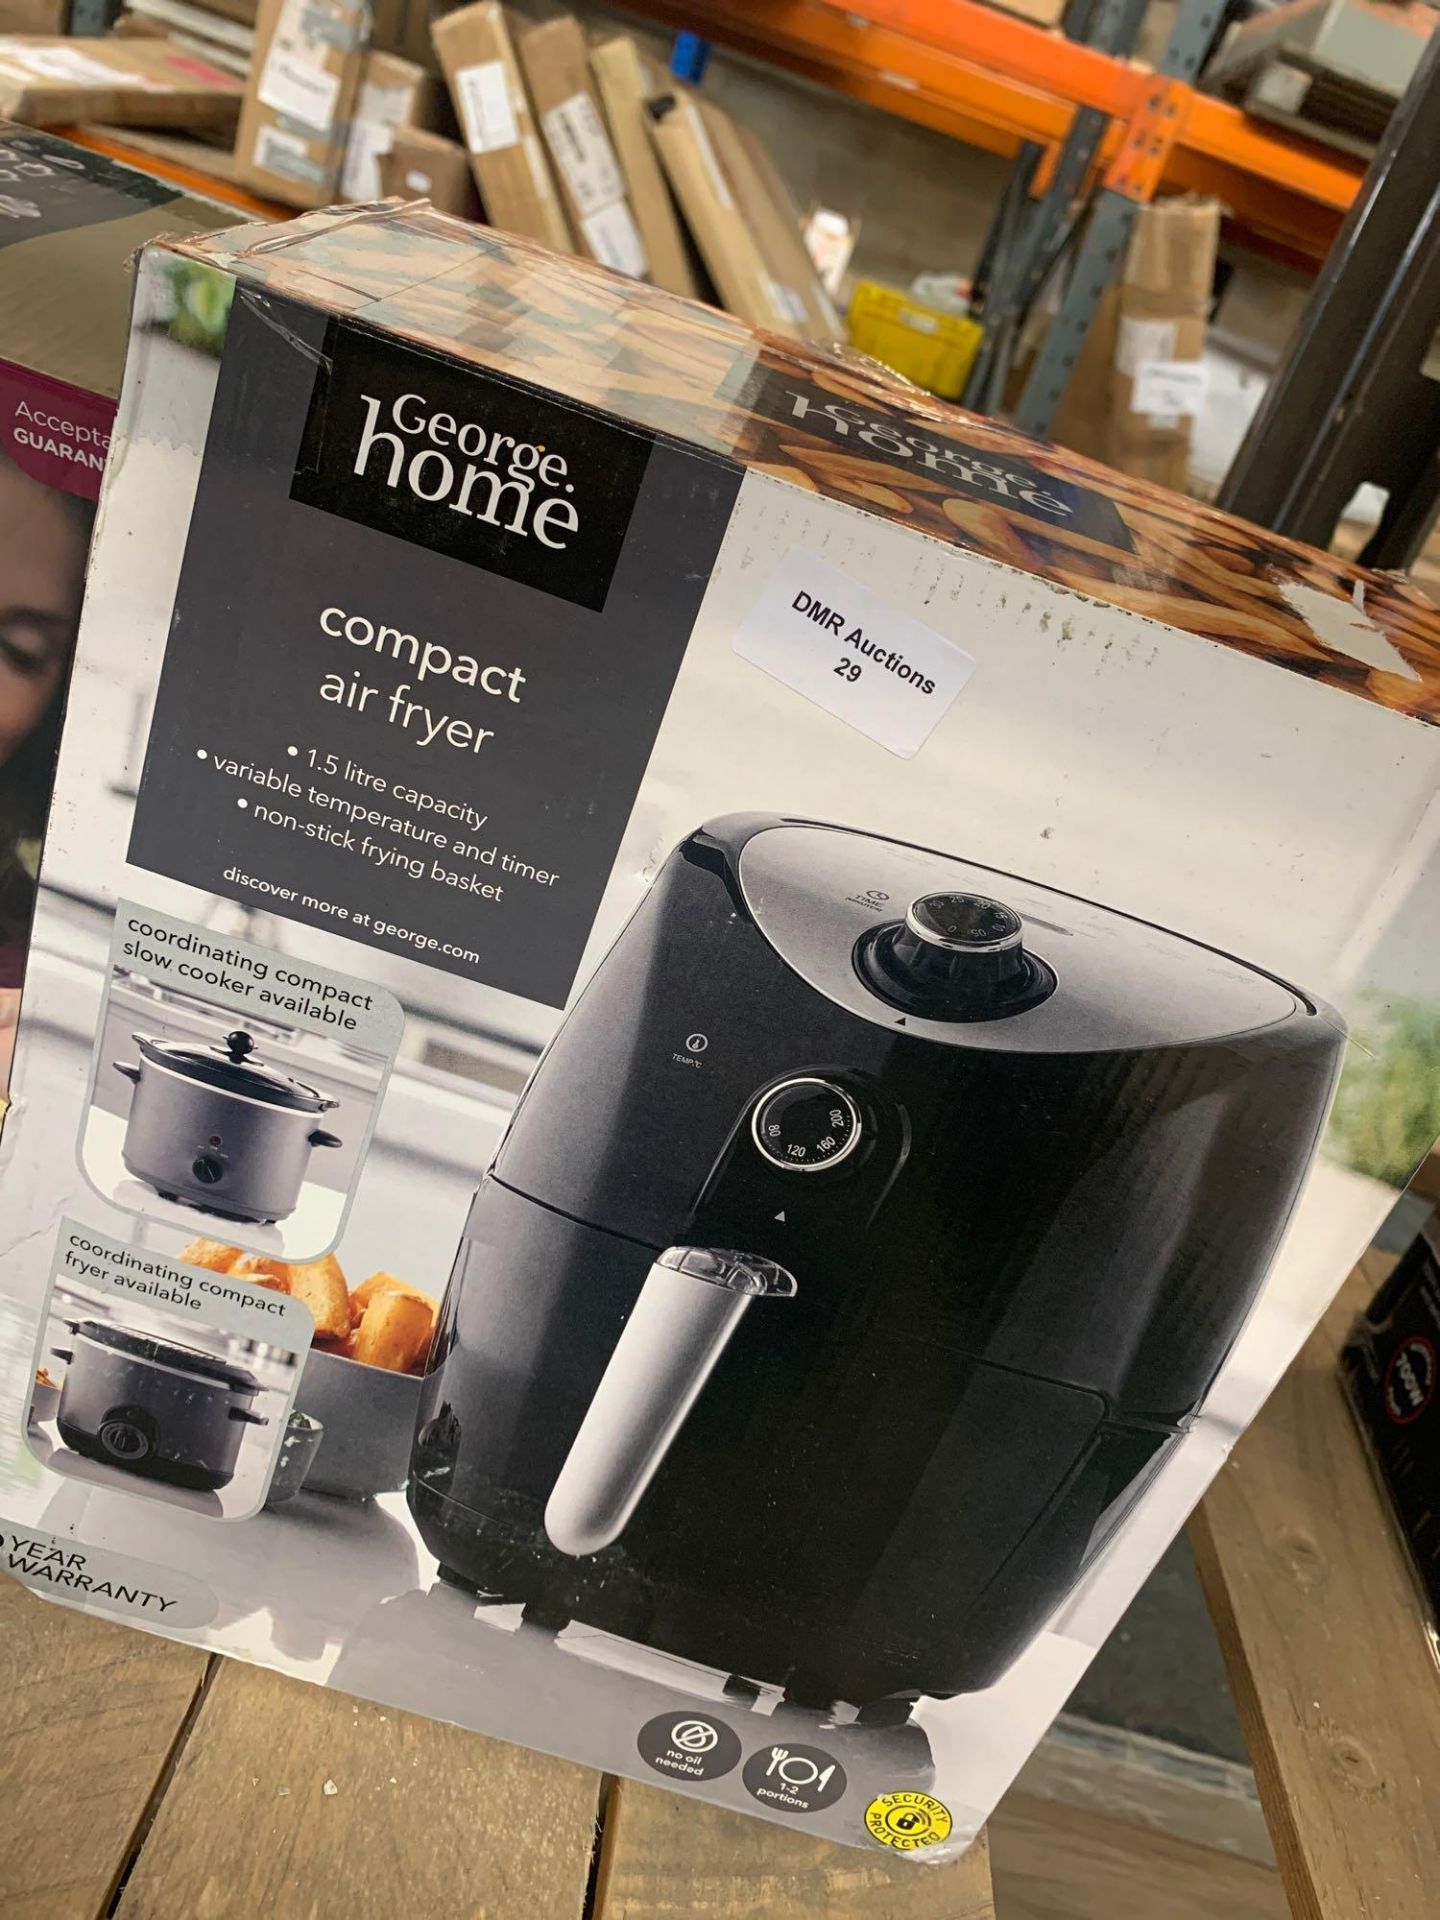 1 LOT TO CONTAIN 1 COMPACT AIR FRYER / RRP£55.00 (THIS ITEM IS AN UNTESTED CUSTOMER RETURN. PUBLIC